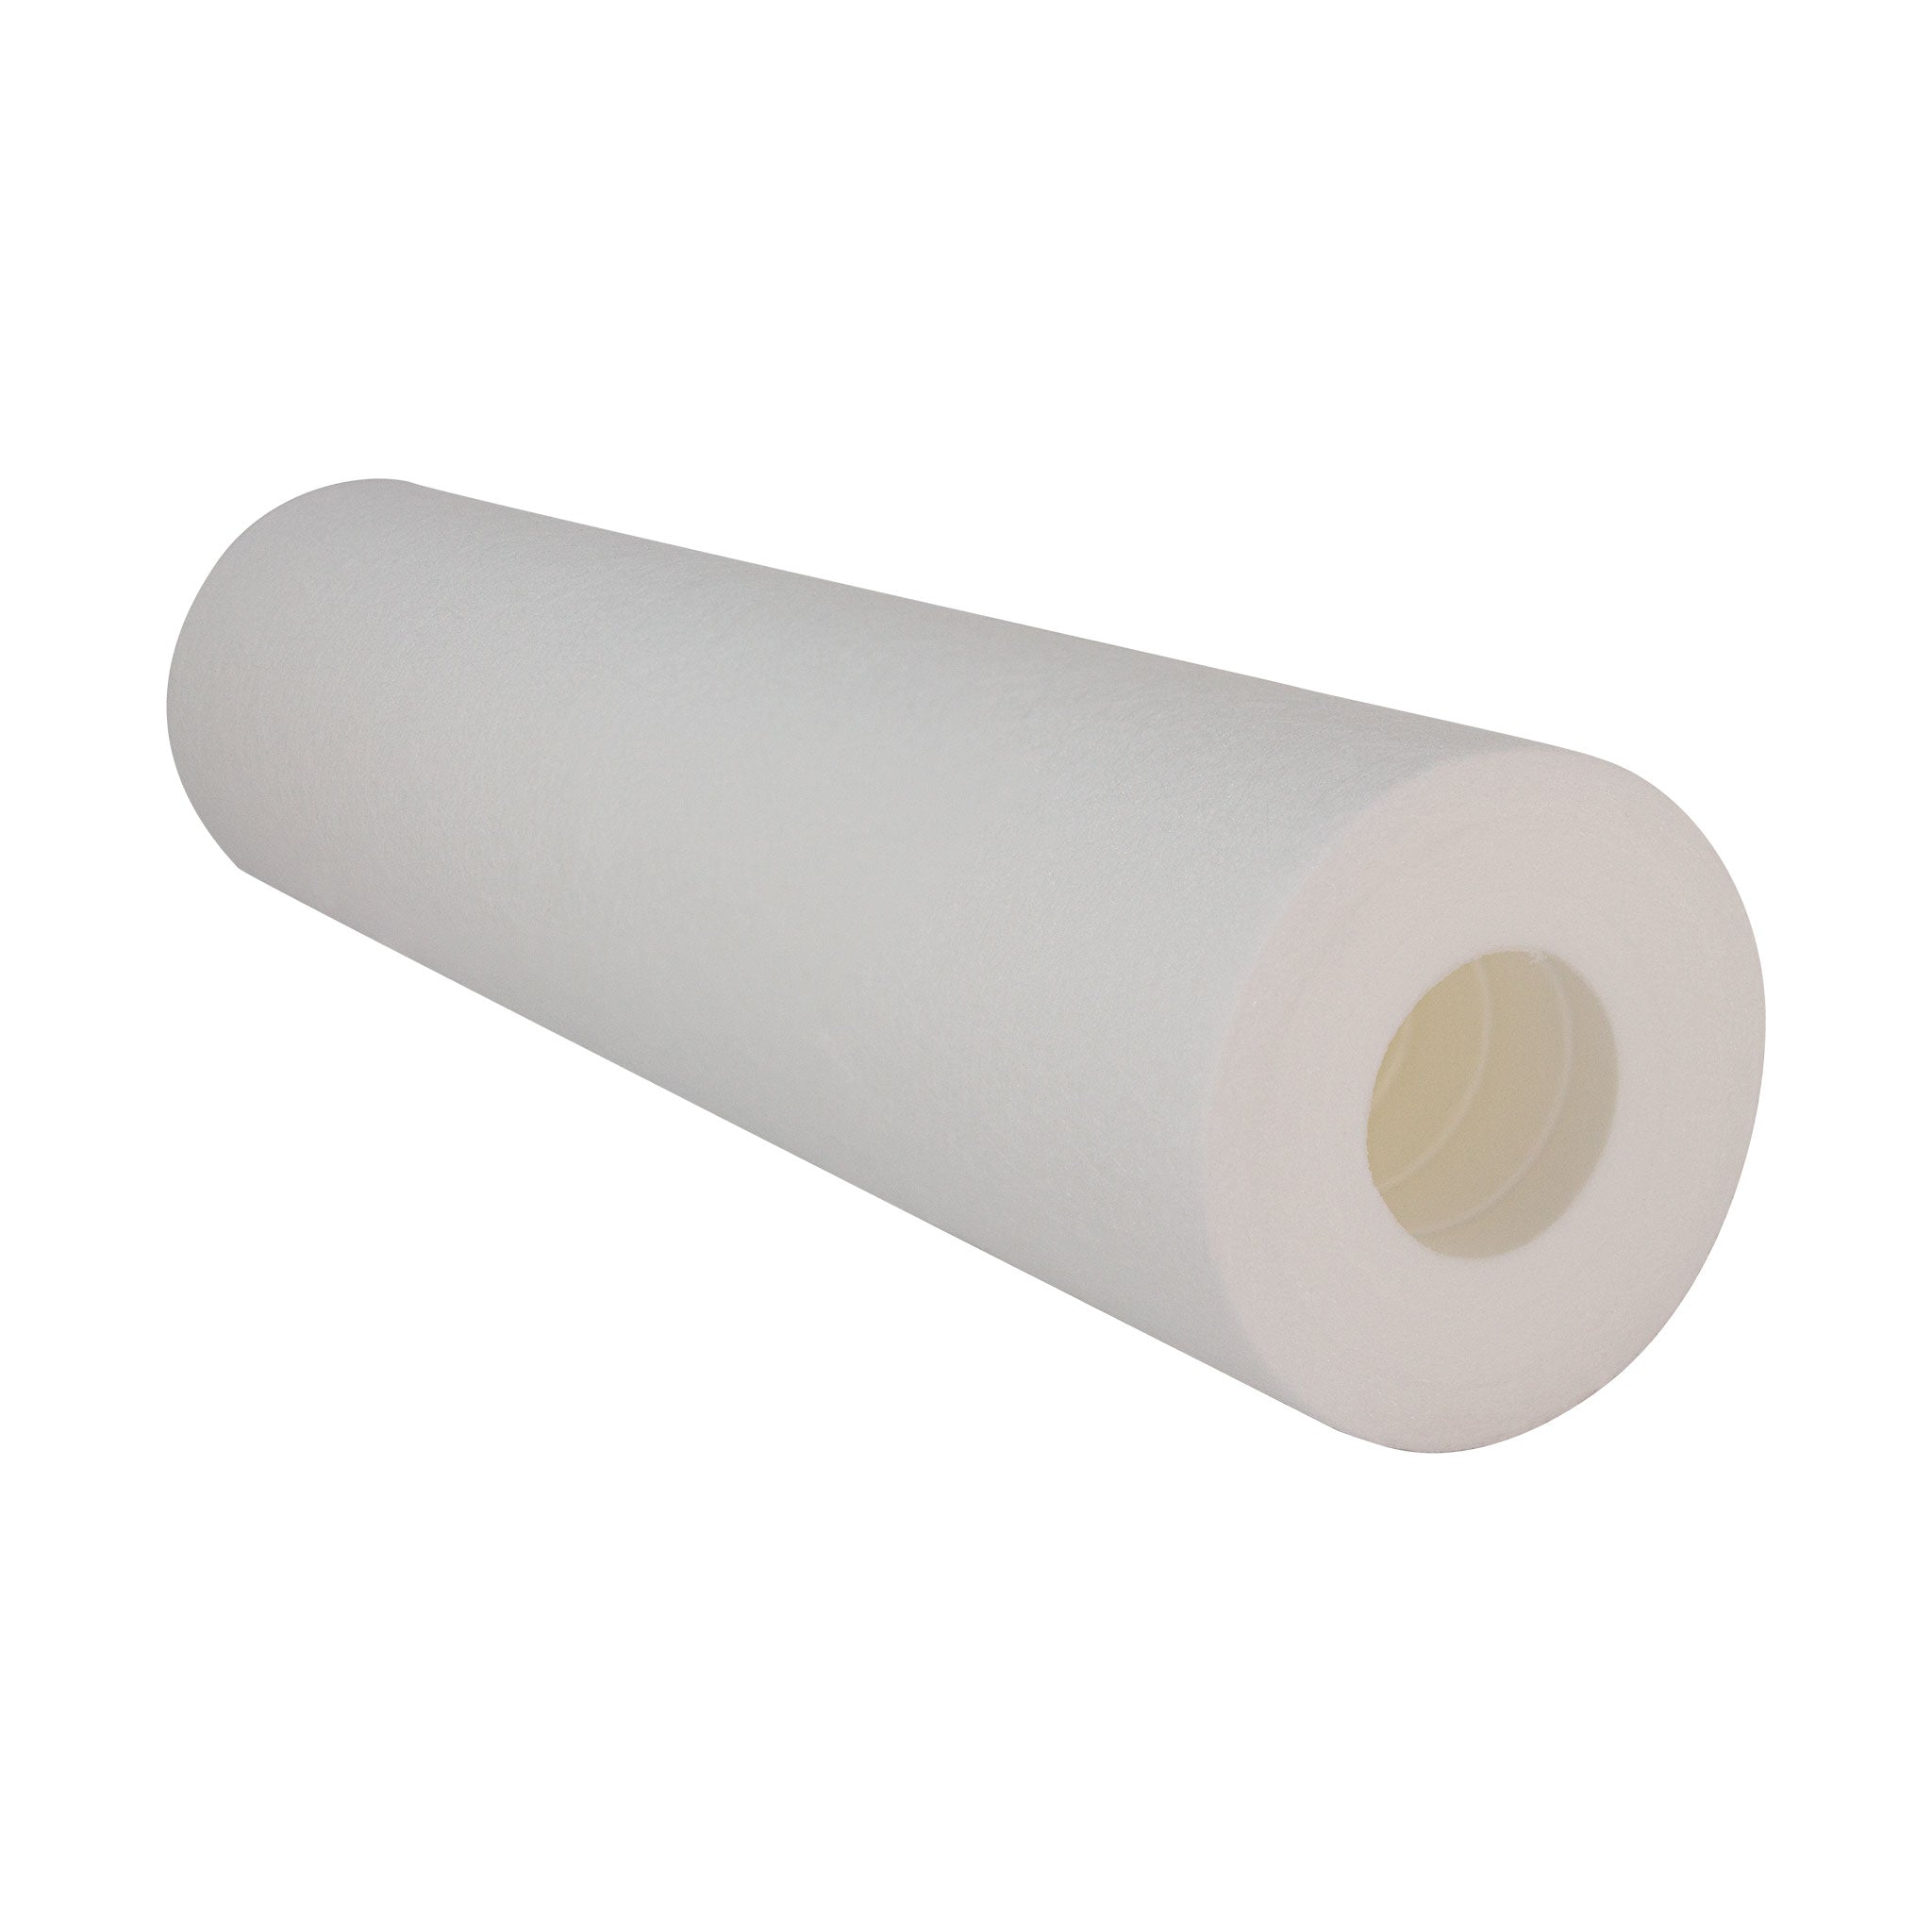 2.5" x 10" PP Sediment For Replacement RO Drinking Water System Filter @ 5 micron. NSF certified